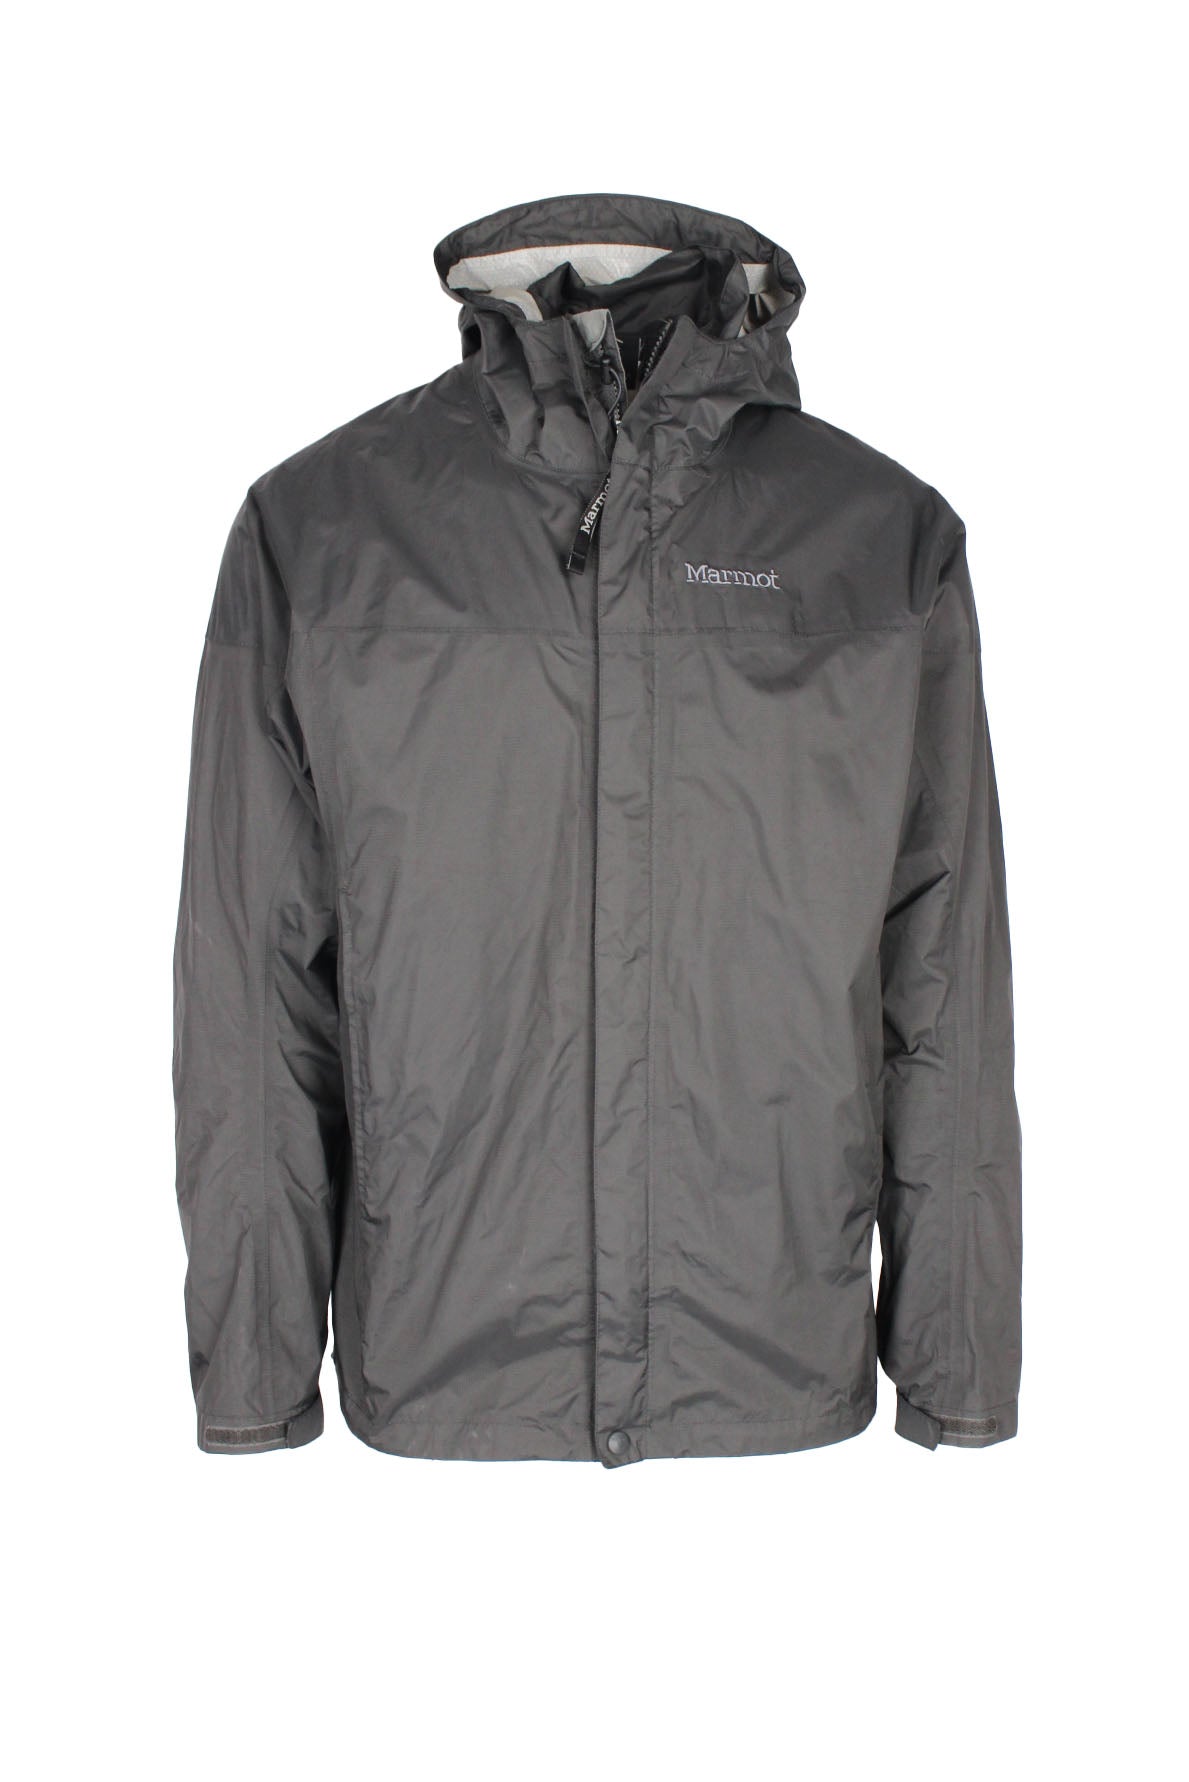 front view of marmot matte black velcro/zip up waterproof packable jacket. features ‘marmot’ logo embroidered at left breast//back right shoulder, side zip hand pockets, underarm zip vents, velcro at cuffs, drawstrings at hood/hem, and left pocket doubles as a packable zip pouch.